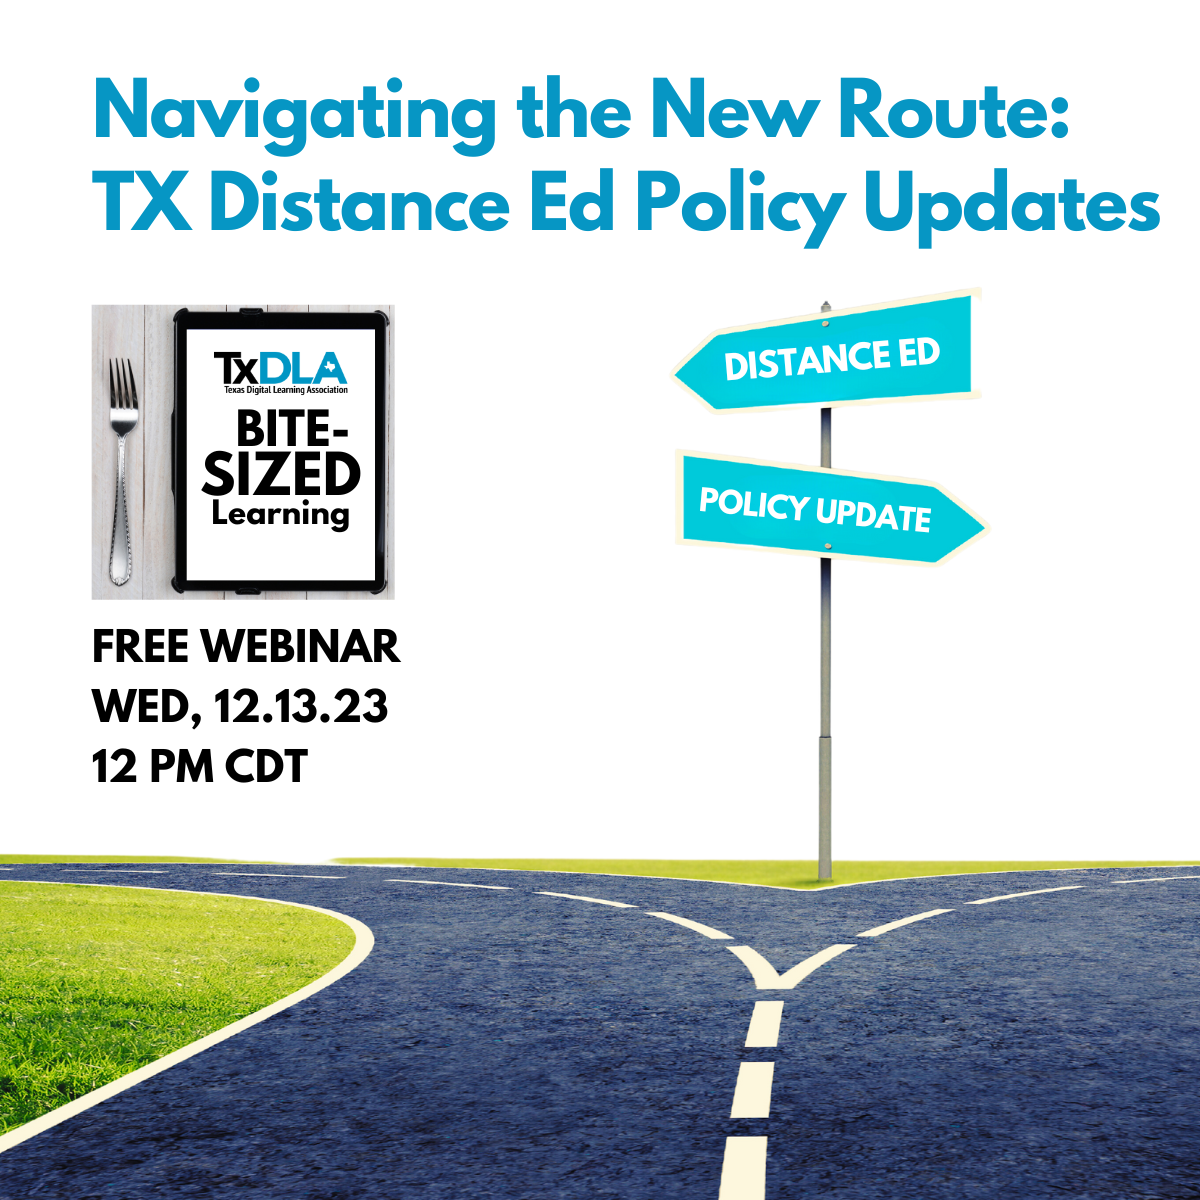 road junction with sign - Navigating the New Route; TX Distance Ed Policy Updates